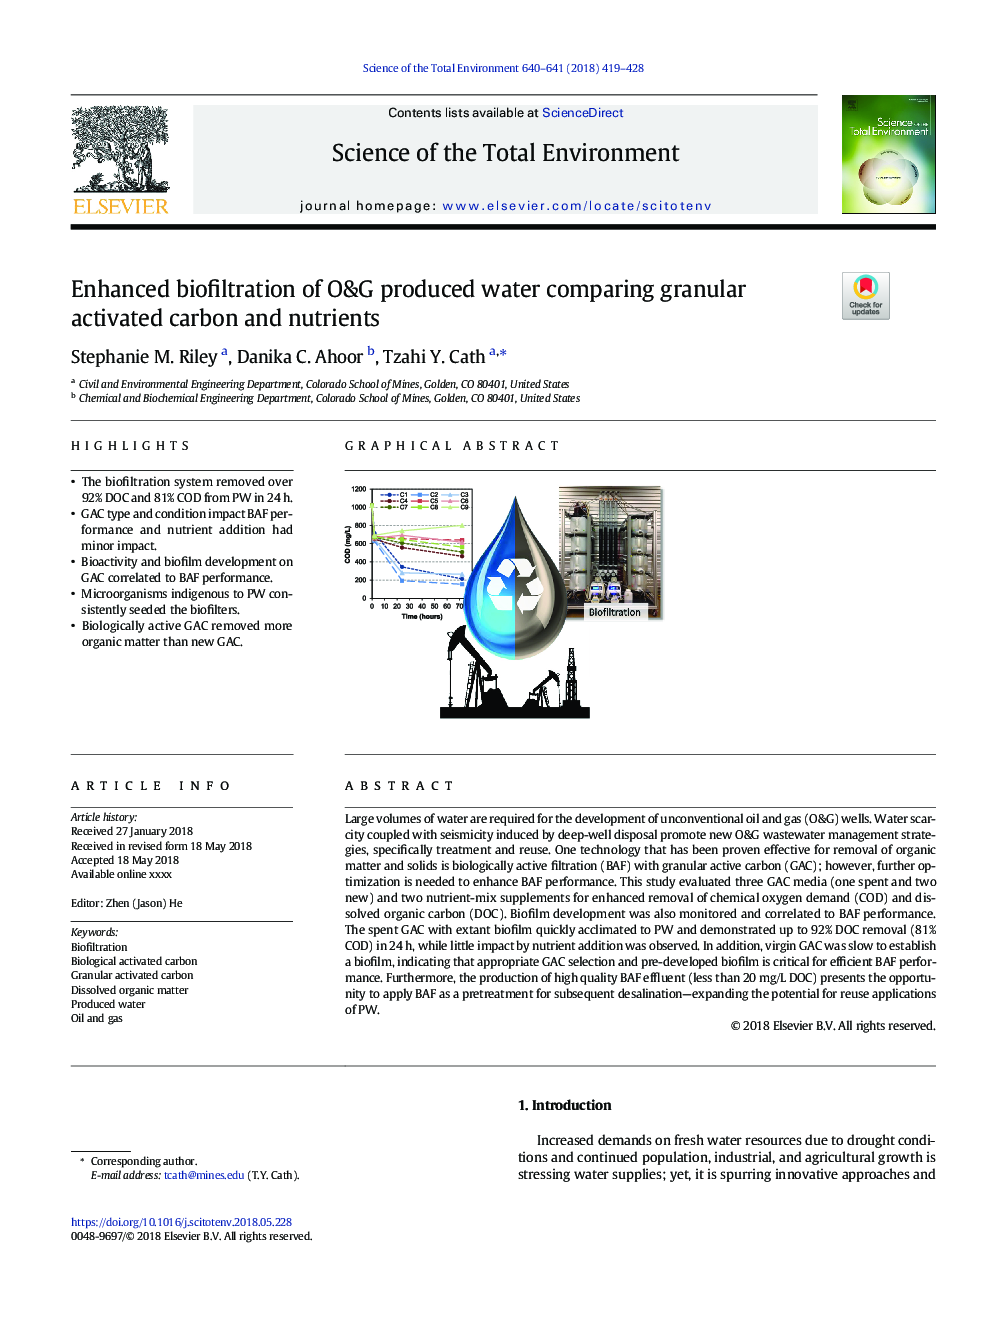 Enhanced biofiltration of O&G produced water comparing granular activated carbon and nutrients